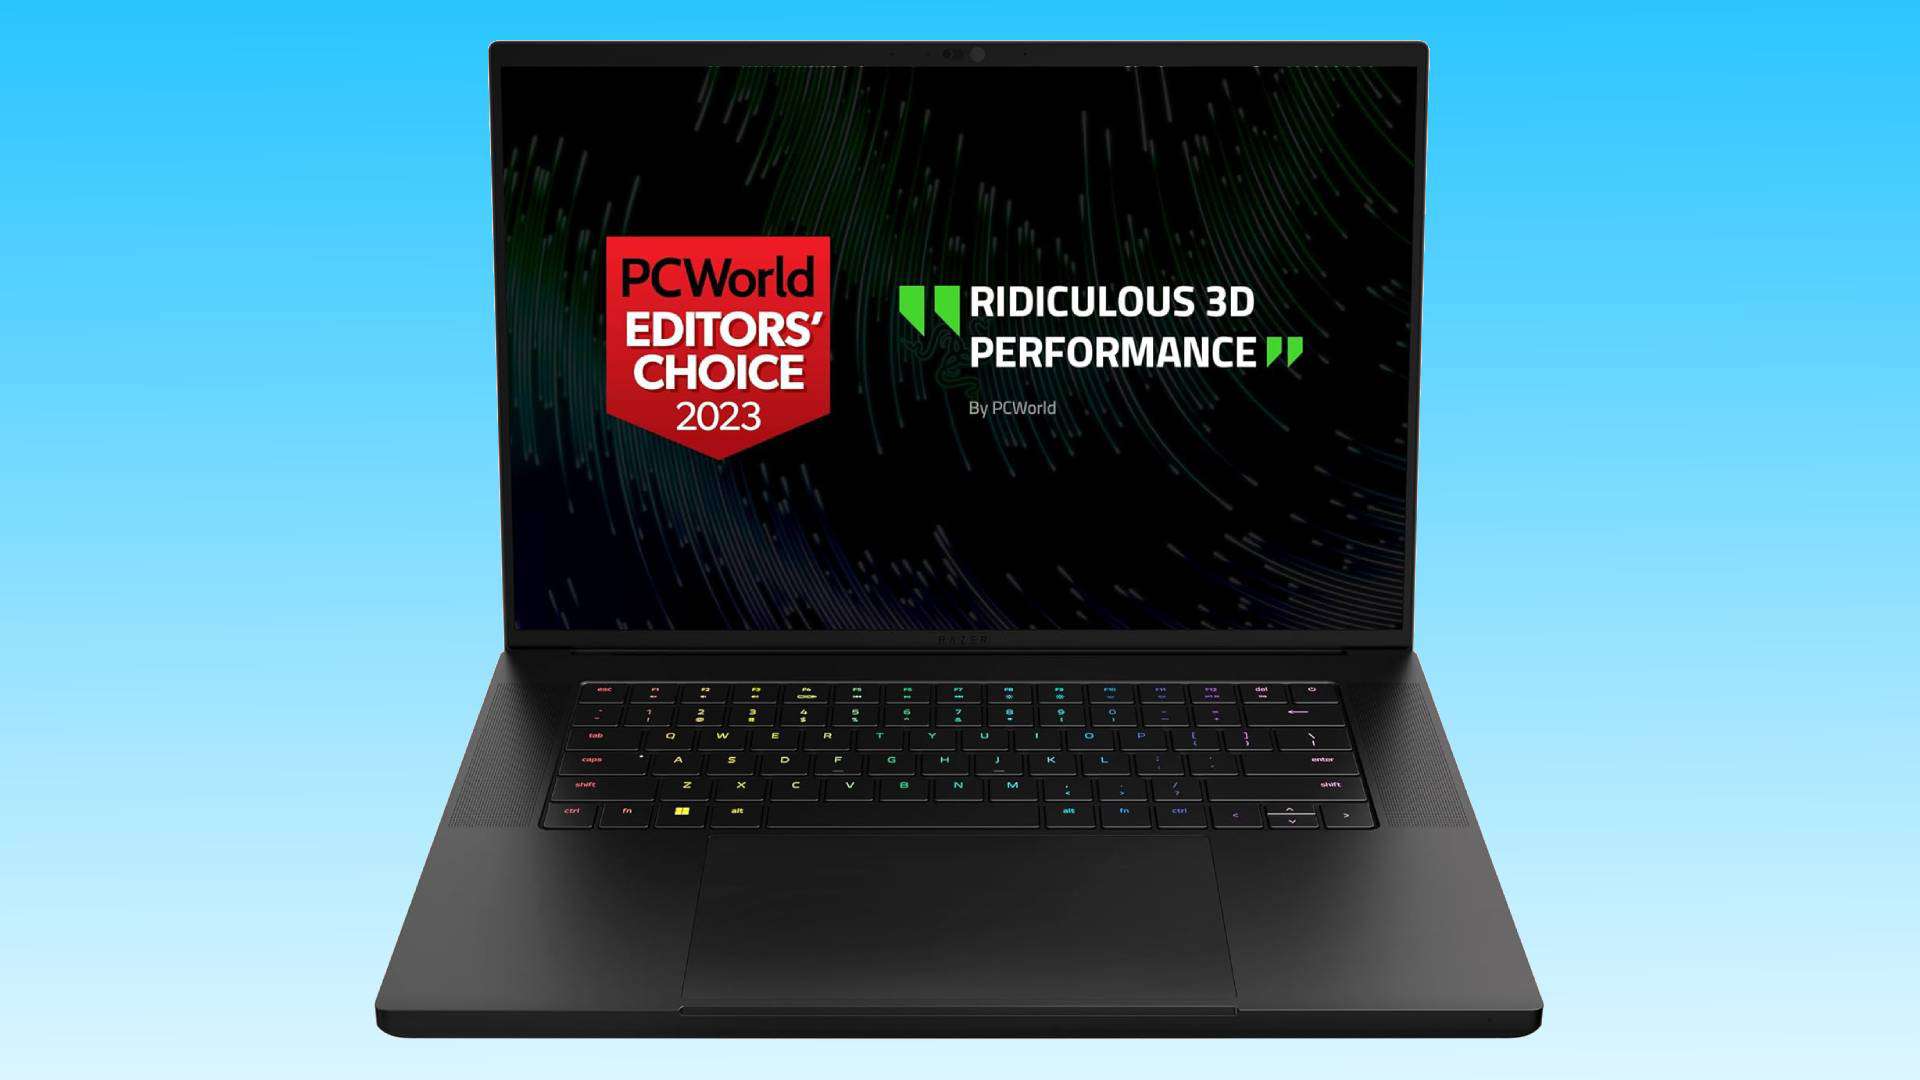 A Razer gaming laptop open on a blue background, displaying an award from pcworld for "ridiculous 3D performance," titled as Editors' Choice 2023.